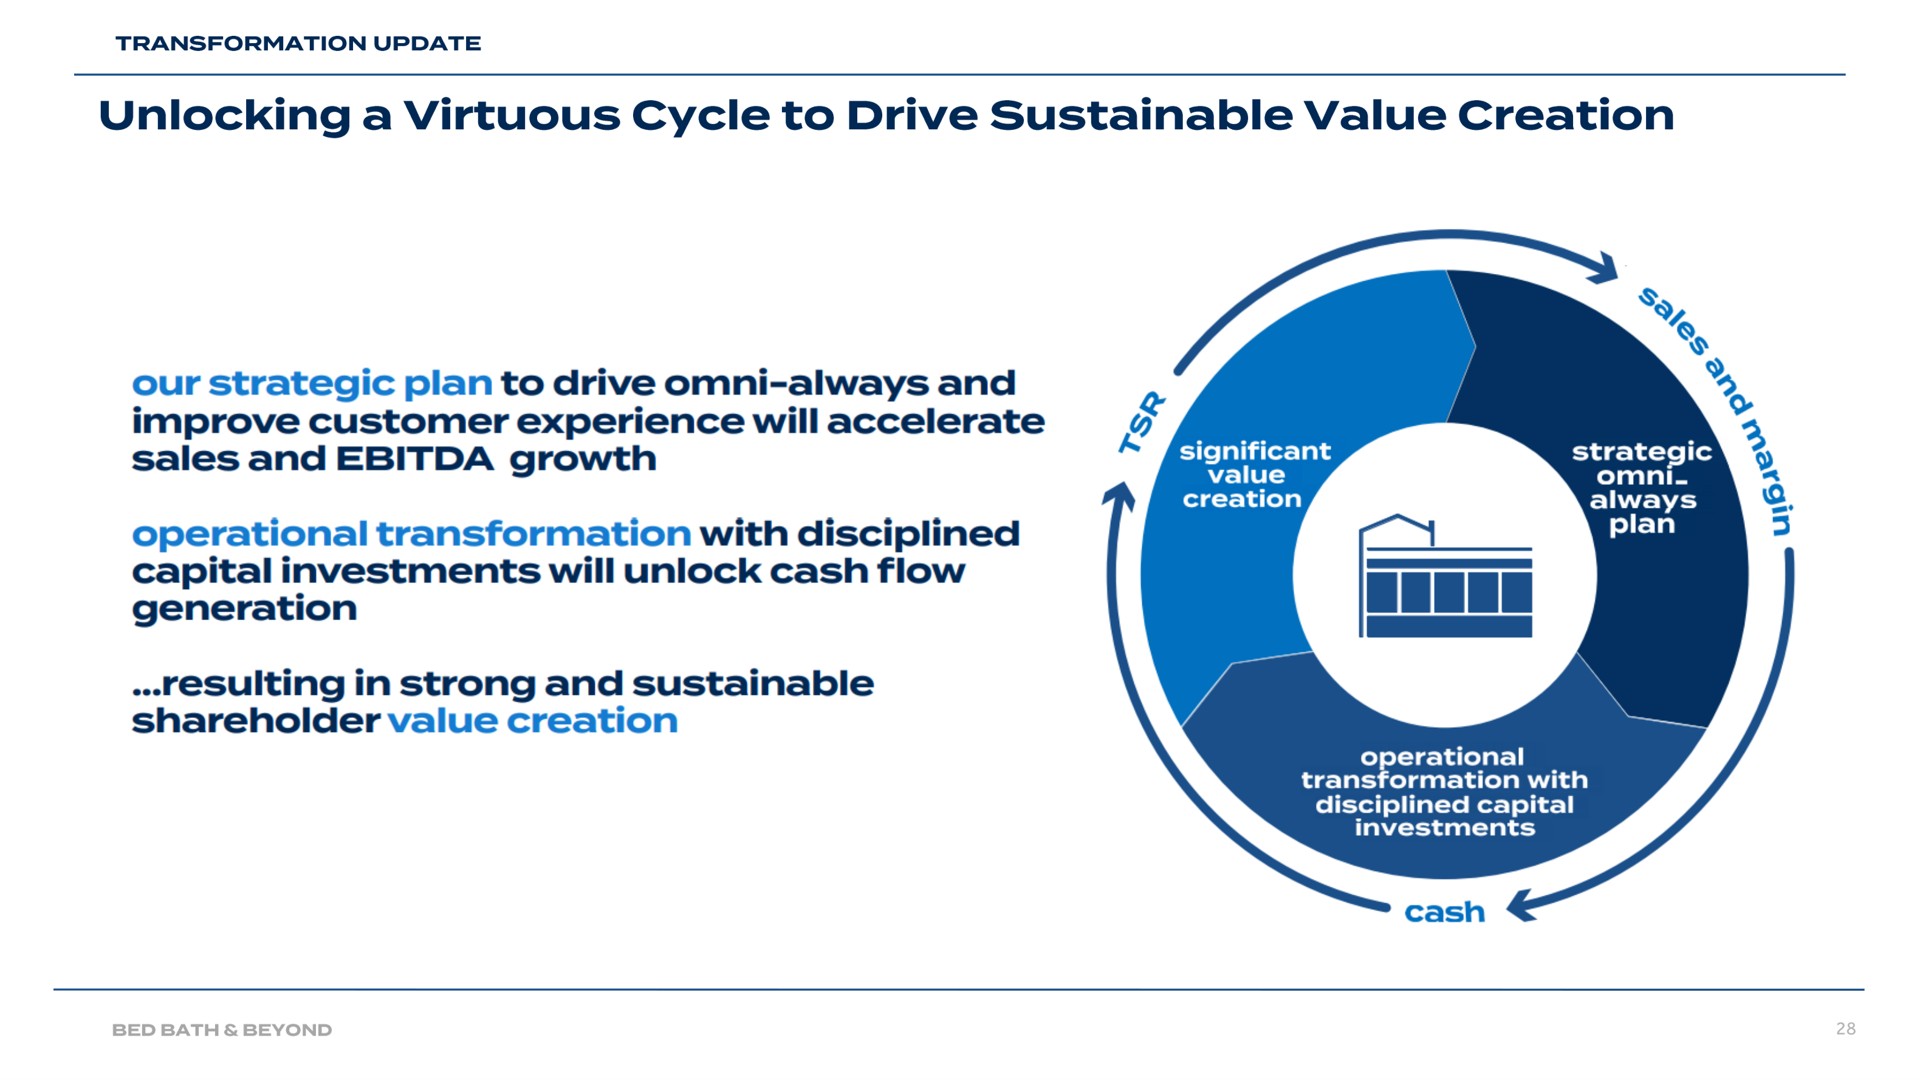 unlocking a virtuous cycle to drive sustainable value creation our strategic plan to drive always and improve customer experience will accelerate sales and growth operational transformation with disciplined capital investments will unlock cash flow generation age resulting in strong and sustainable | Bed Bath & Beyond